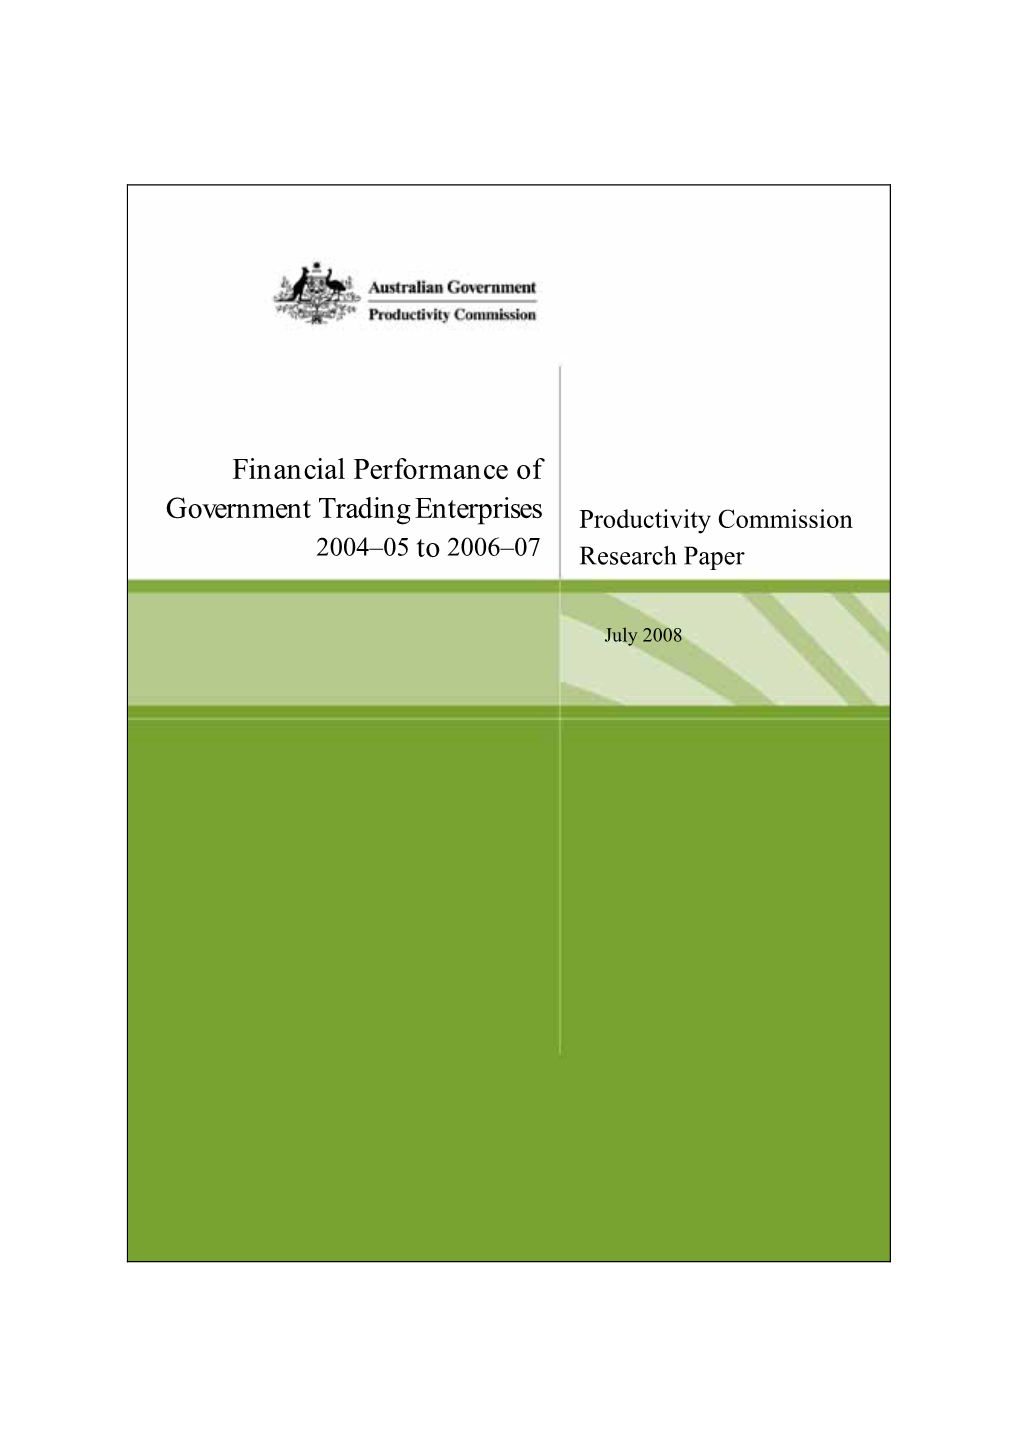 Financial Performance of Government Trading Enterprises 2004-05 to 2006-07